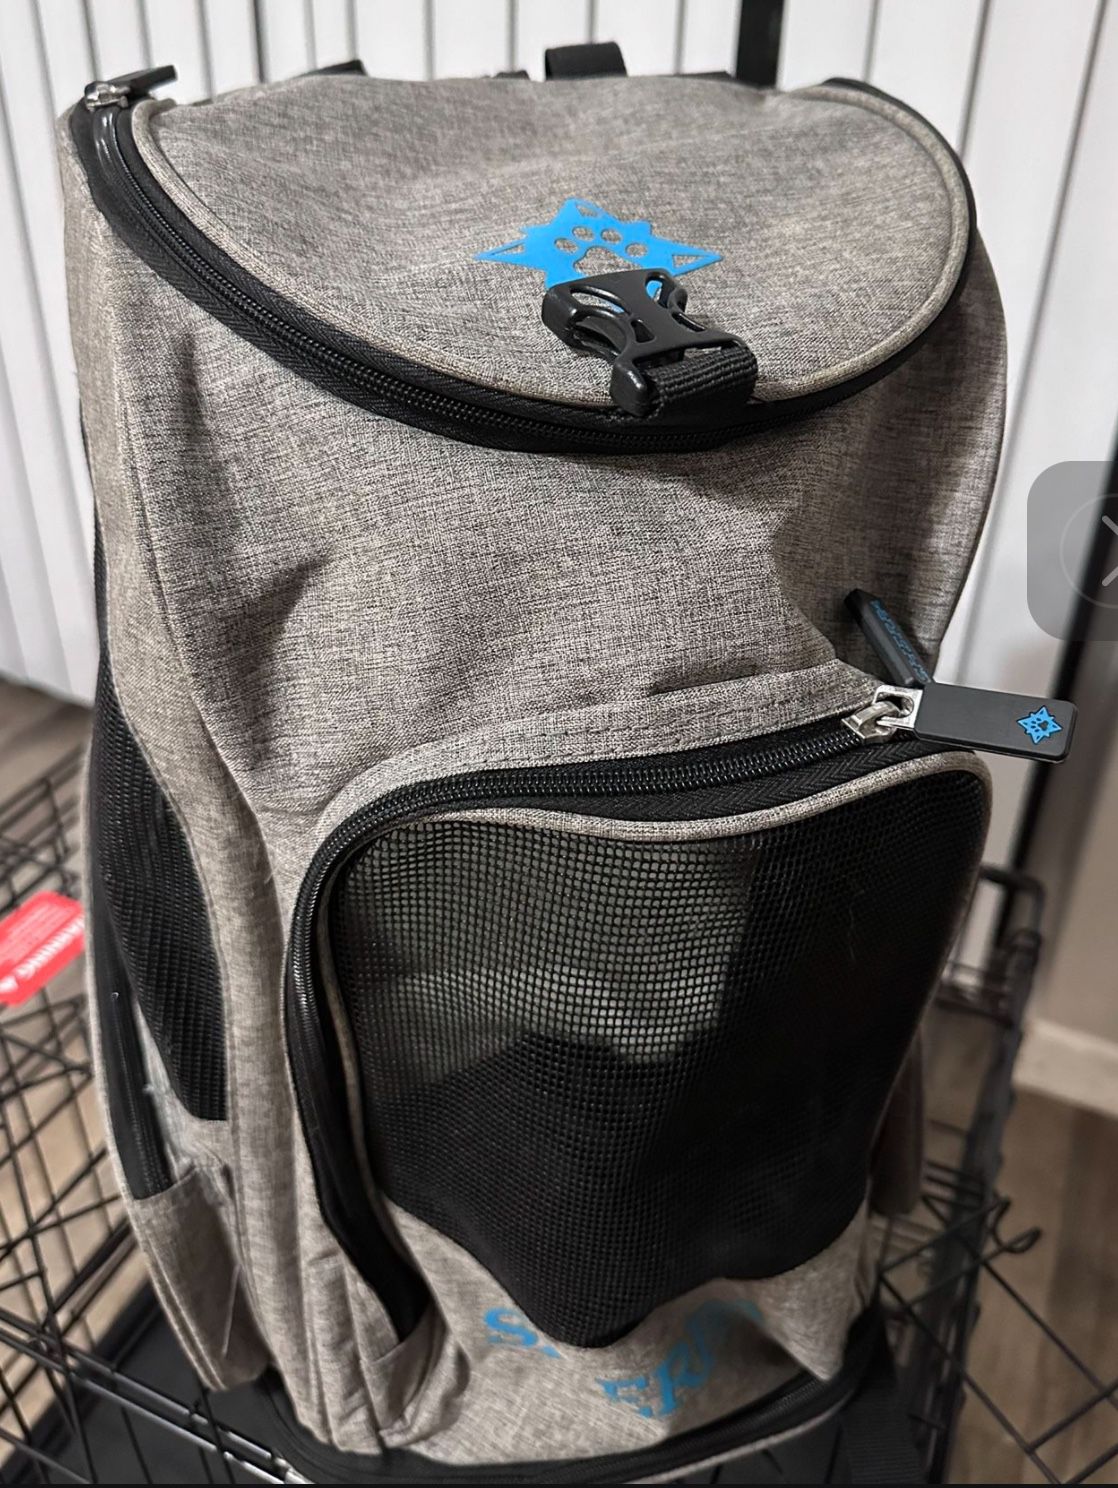 Airline Approved Travel Backpack Pet Carrier